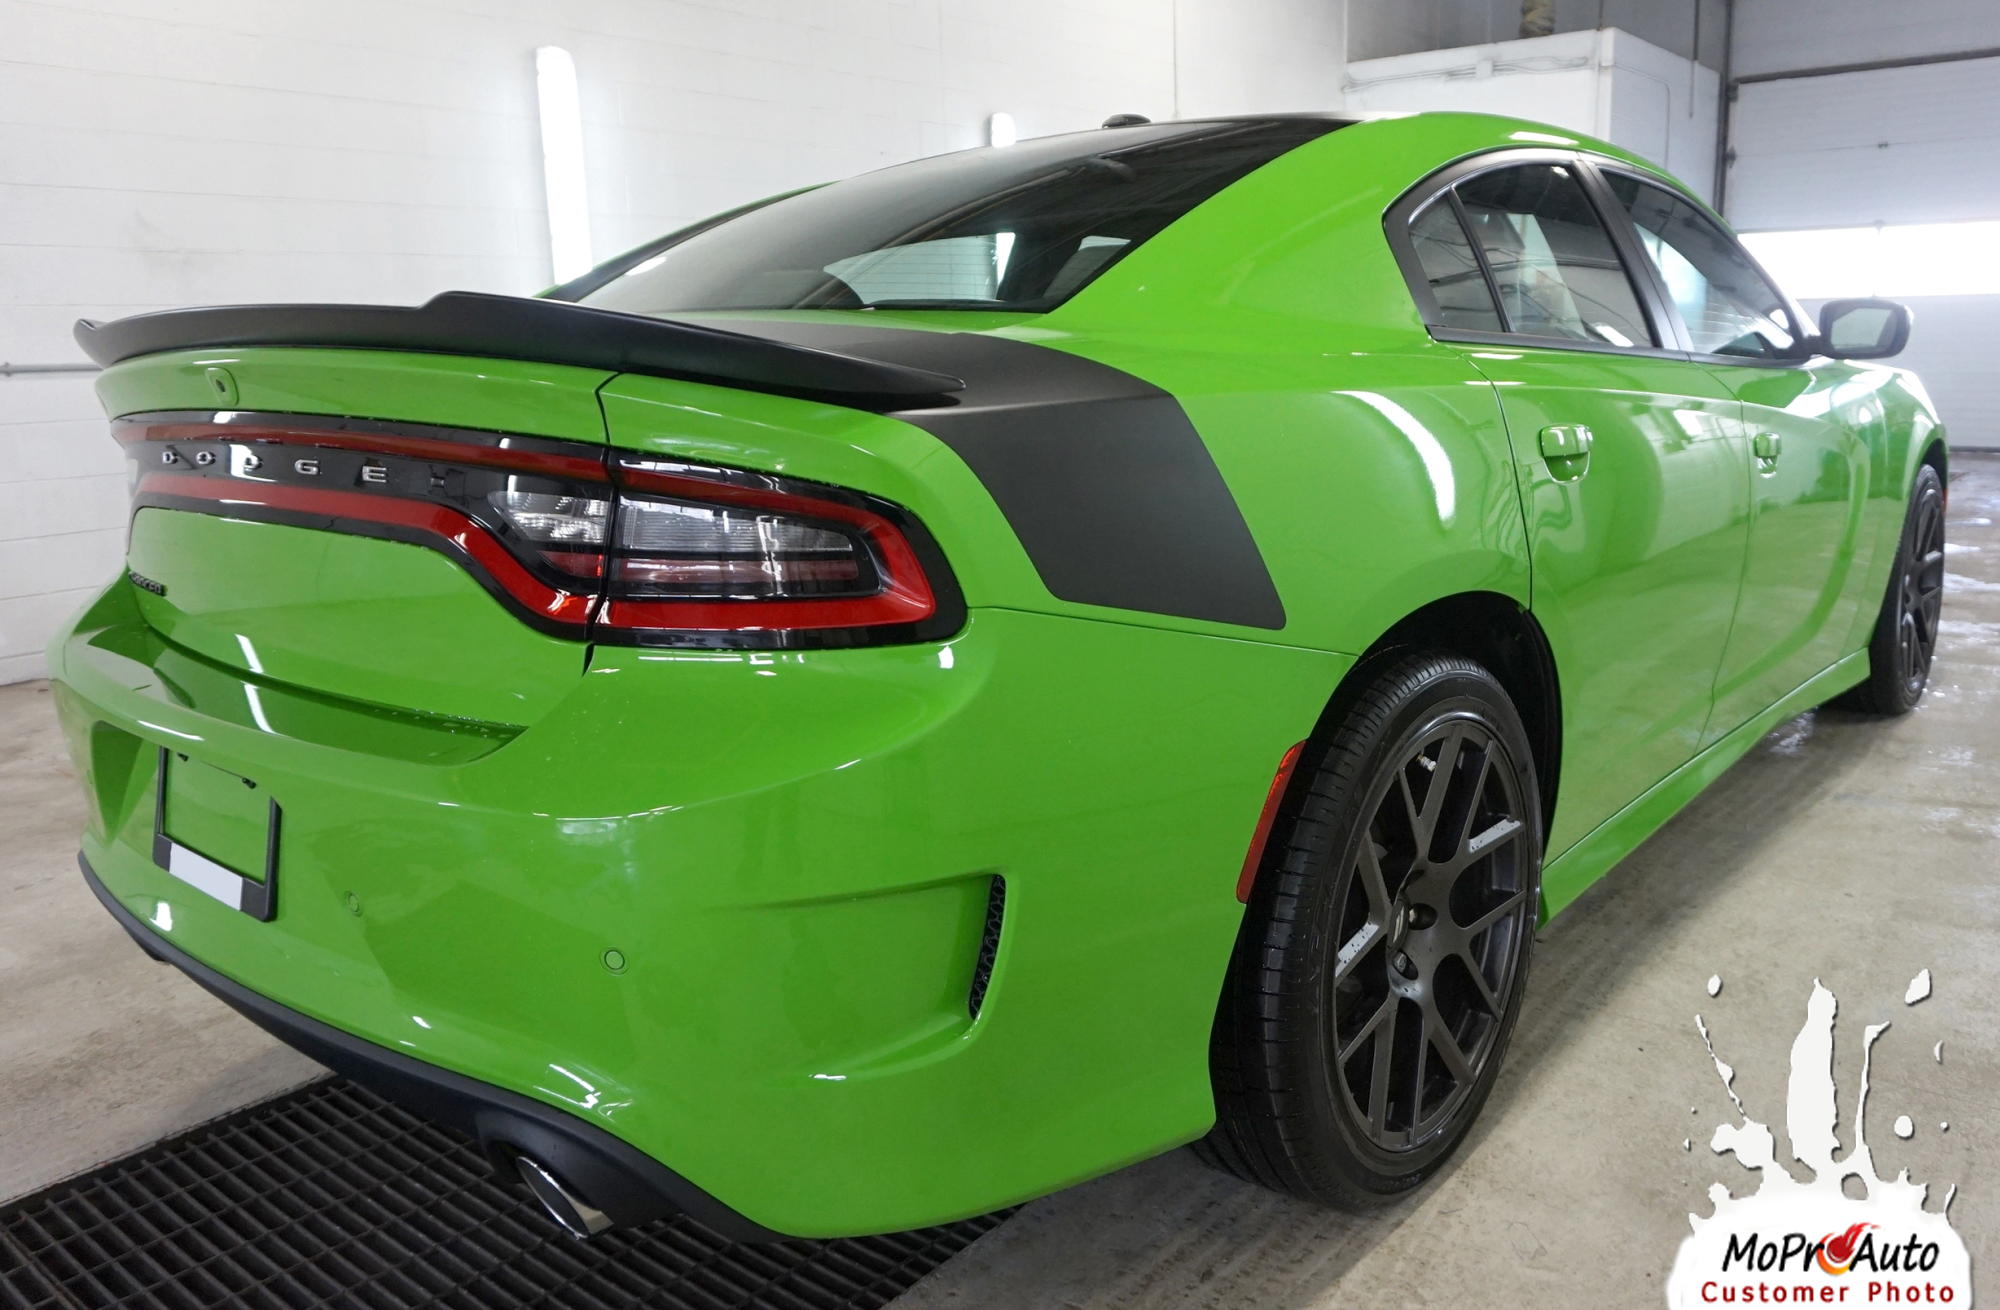 2015, 2016, 2017, 2018, 2019, 2020, 2021, 2022, 2023 SINISTER TAILBAND : Dodge Charger Daytona Hemi SRT 392 Style Center Decklid Trunk Vinyl Graphic Decals and Stripe Kit